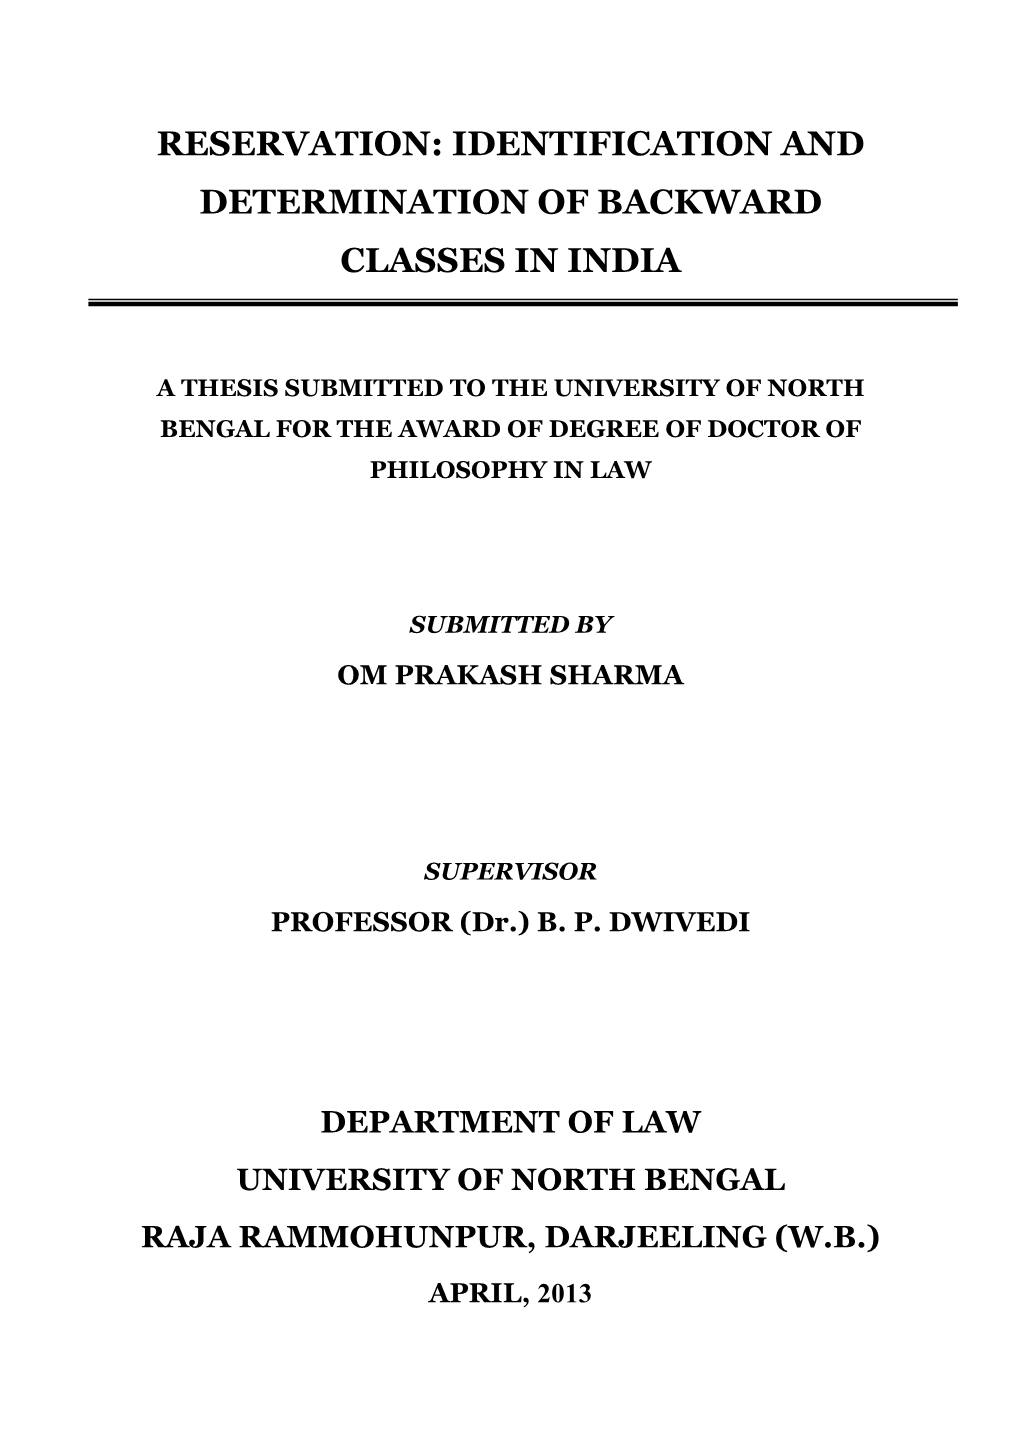 Reservation: Identification and Determination of Backward Classes in India